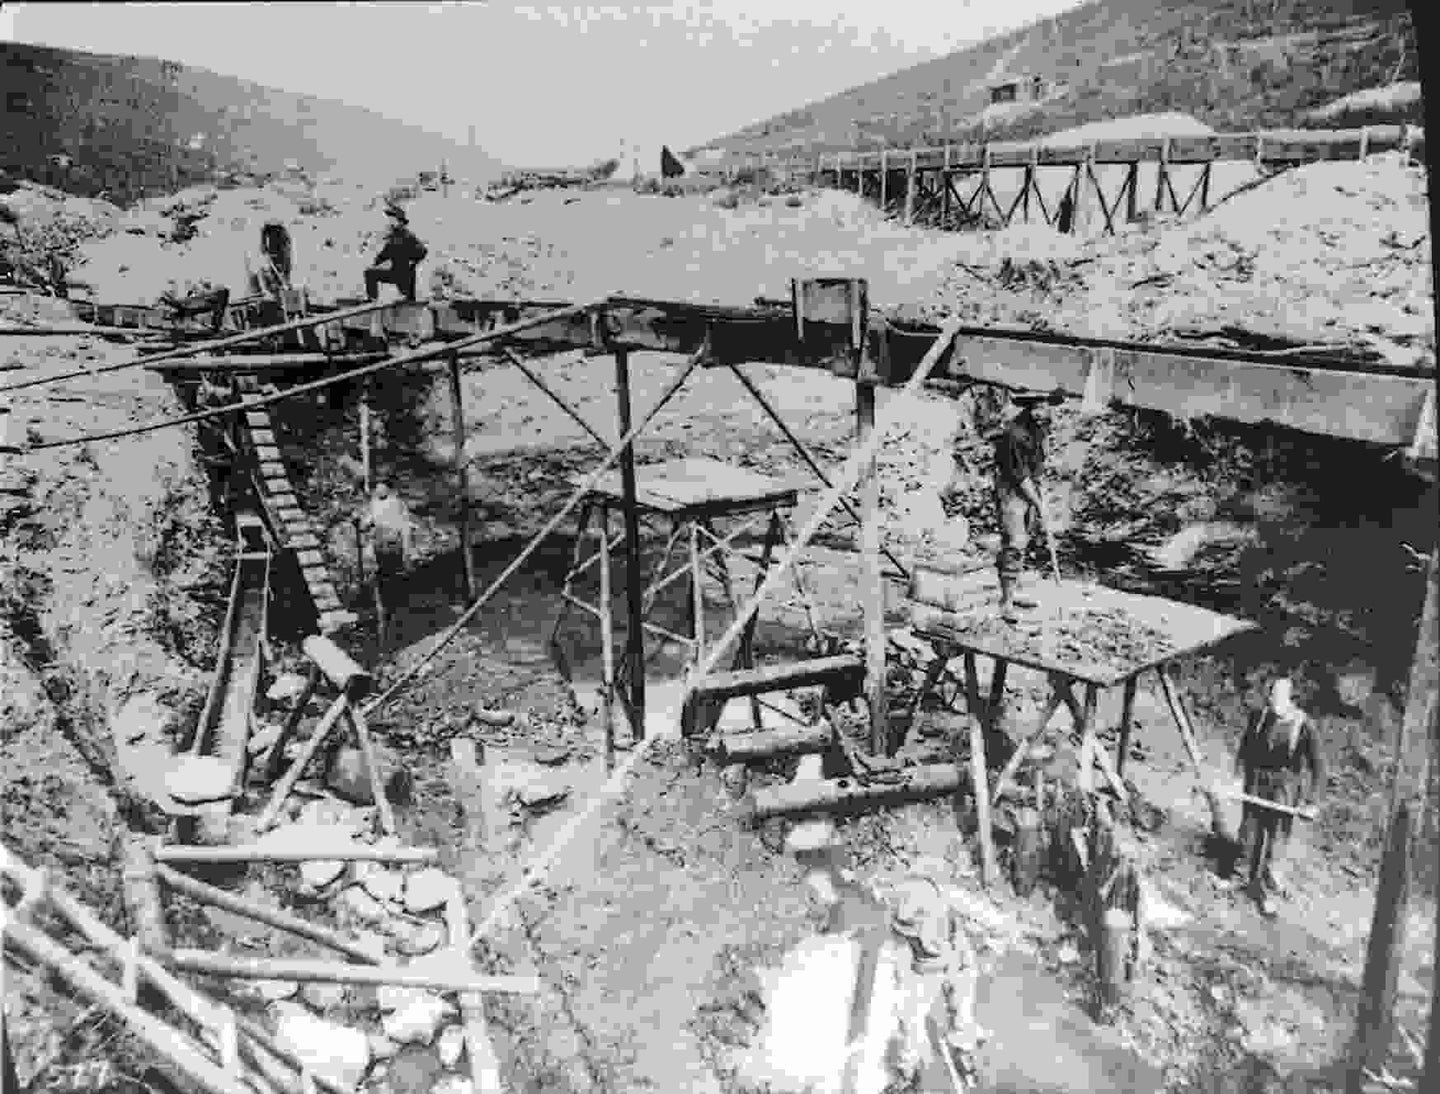 Working in an Open Pit, c1897